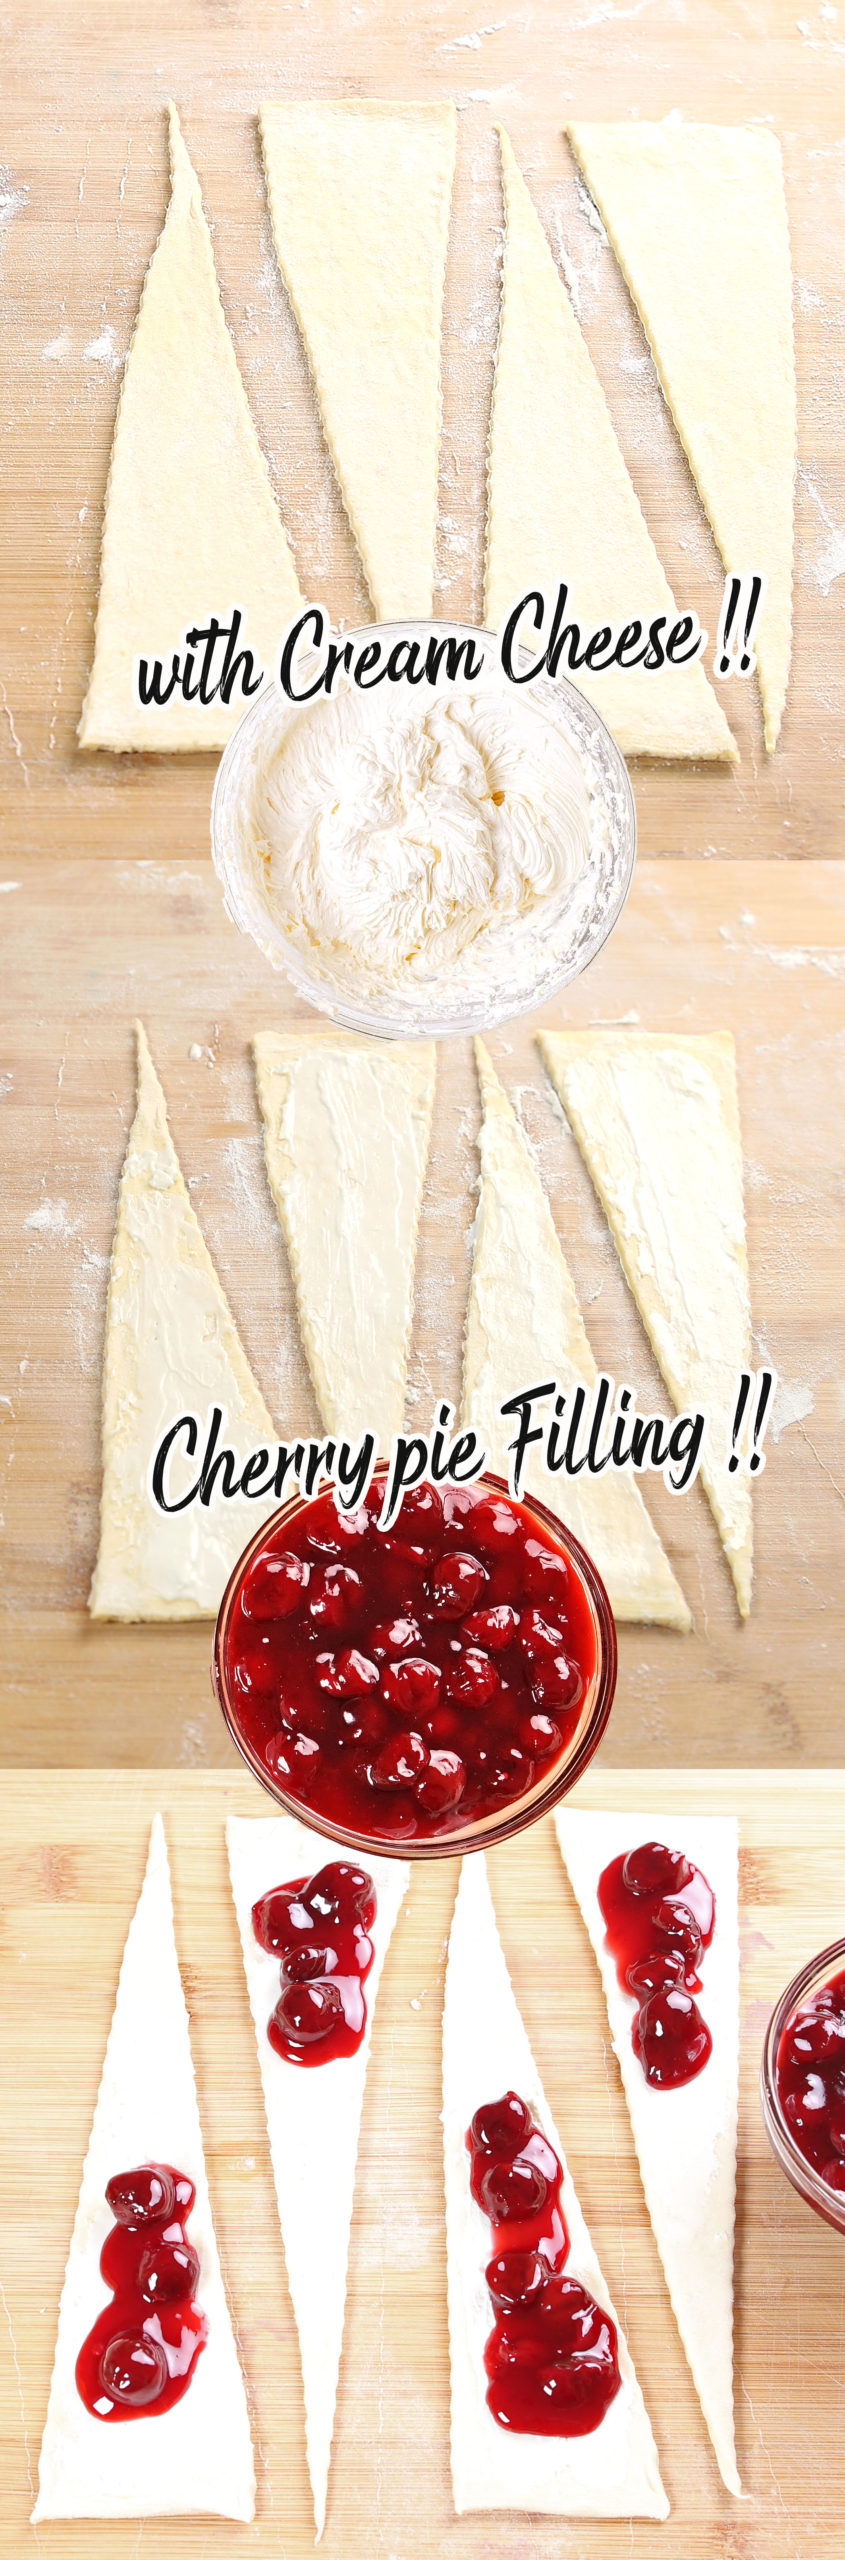 Mini Cherry Pie Crescent Rolls are so simple and so delicious… the perfect breakfast treat! It starts with refrigerated crescent rolls filled with cherry pie filling and cream cheese, then baked to perfection and topped with powdered sugar.